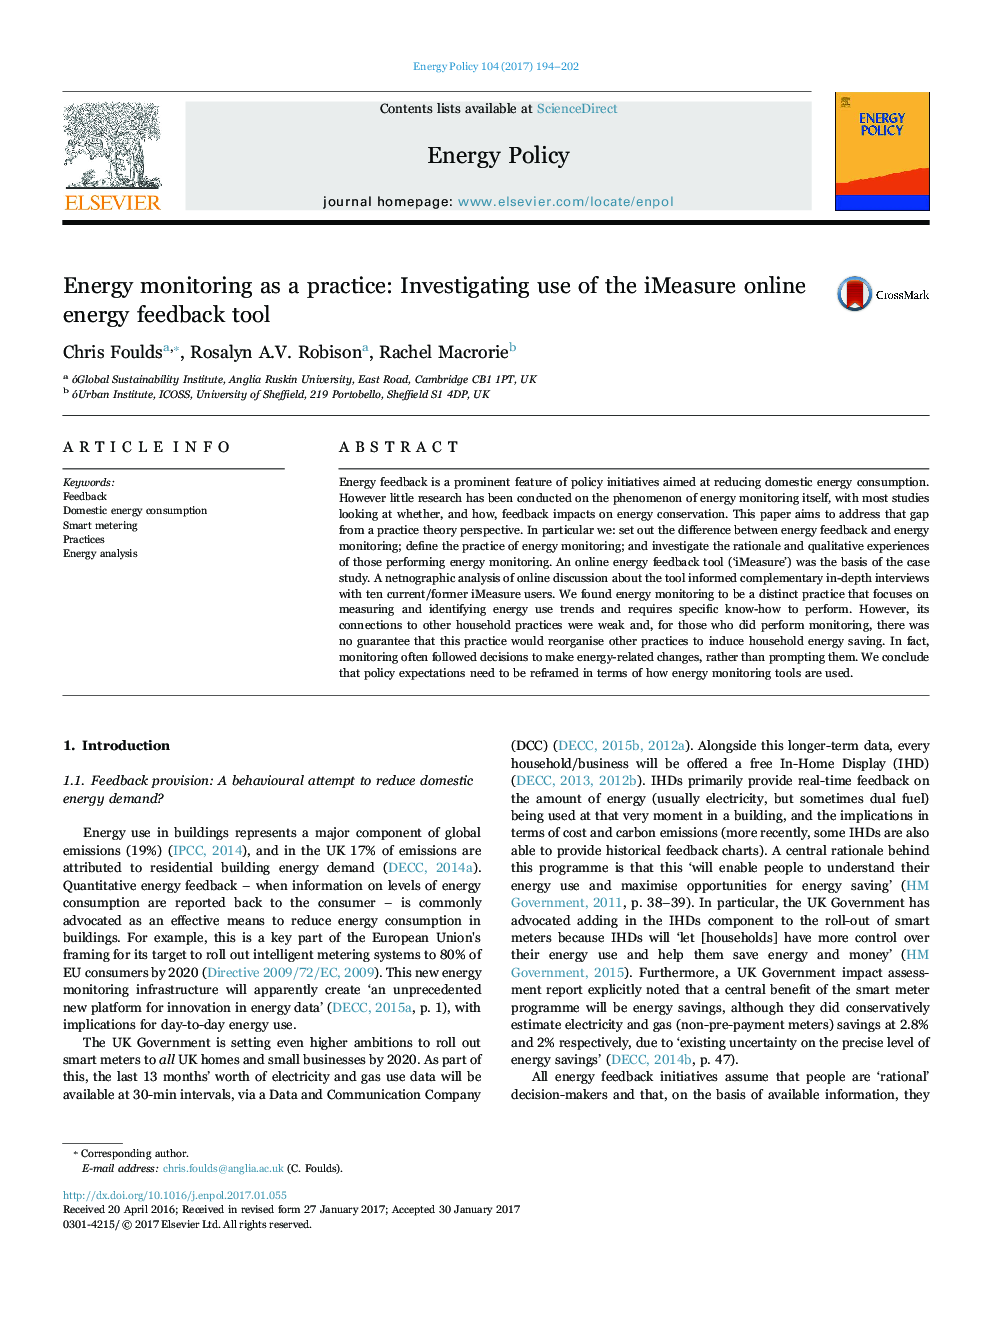 Energy monitoring as a practice: Investigating use of the iMeasure online energy feedback tool